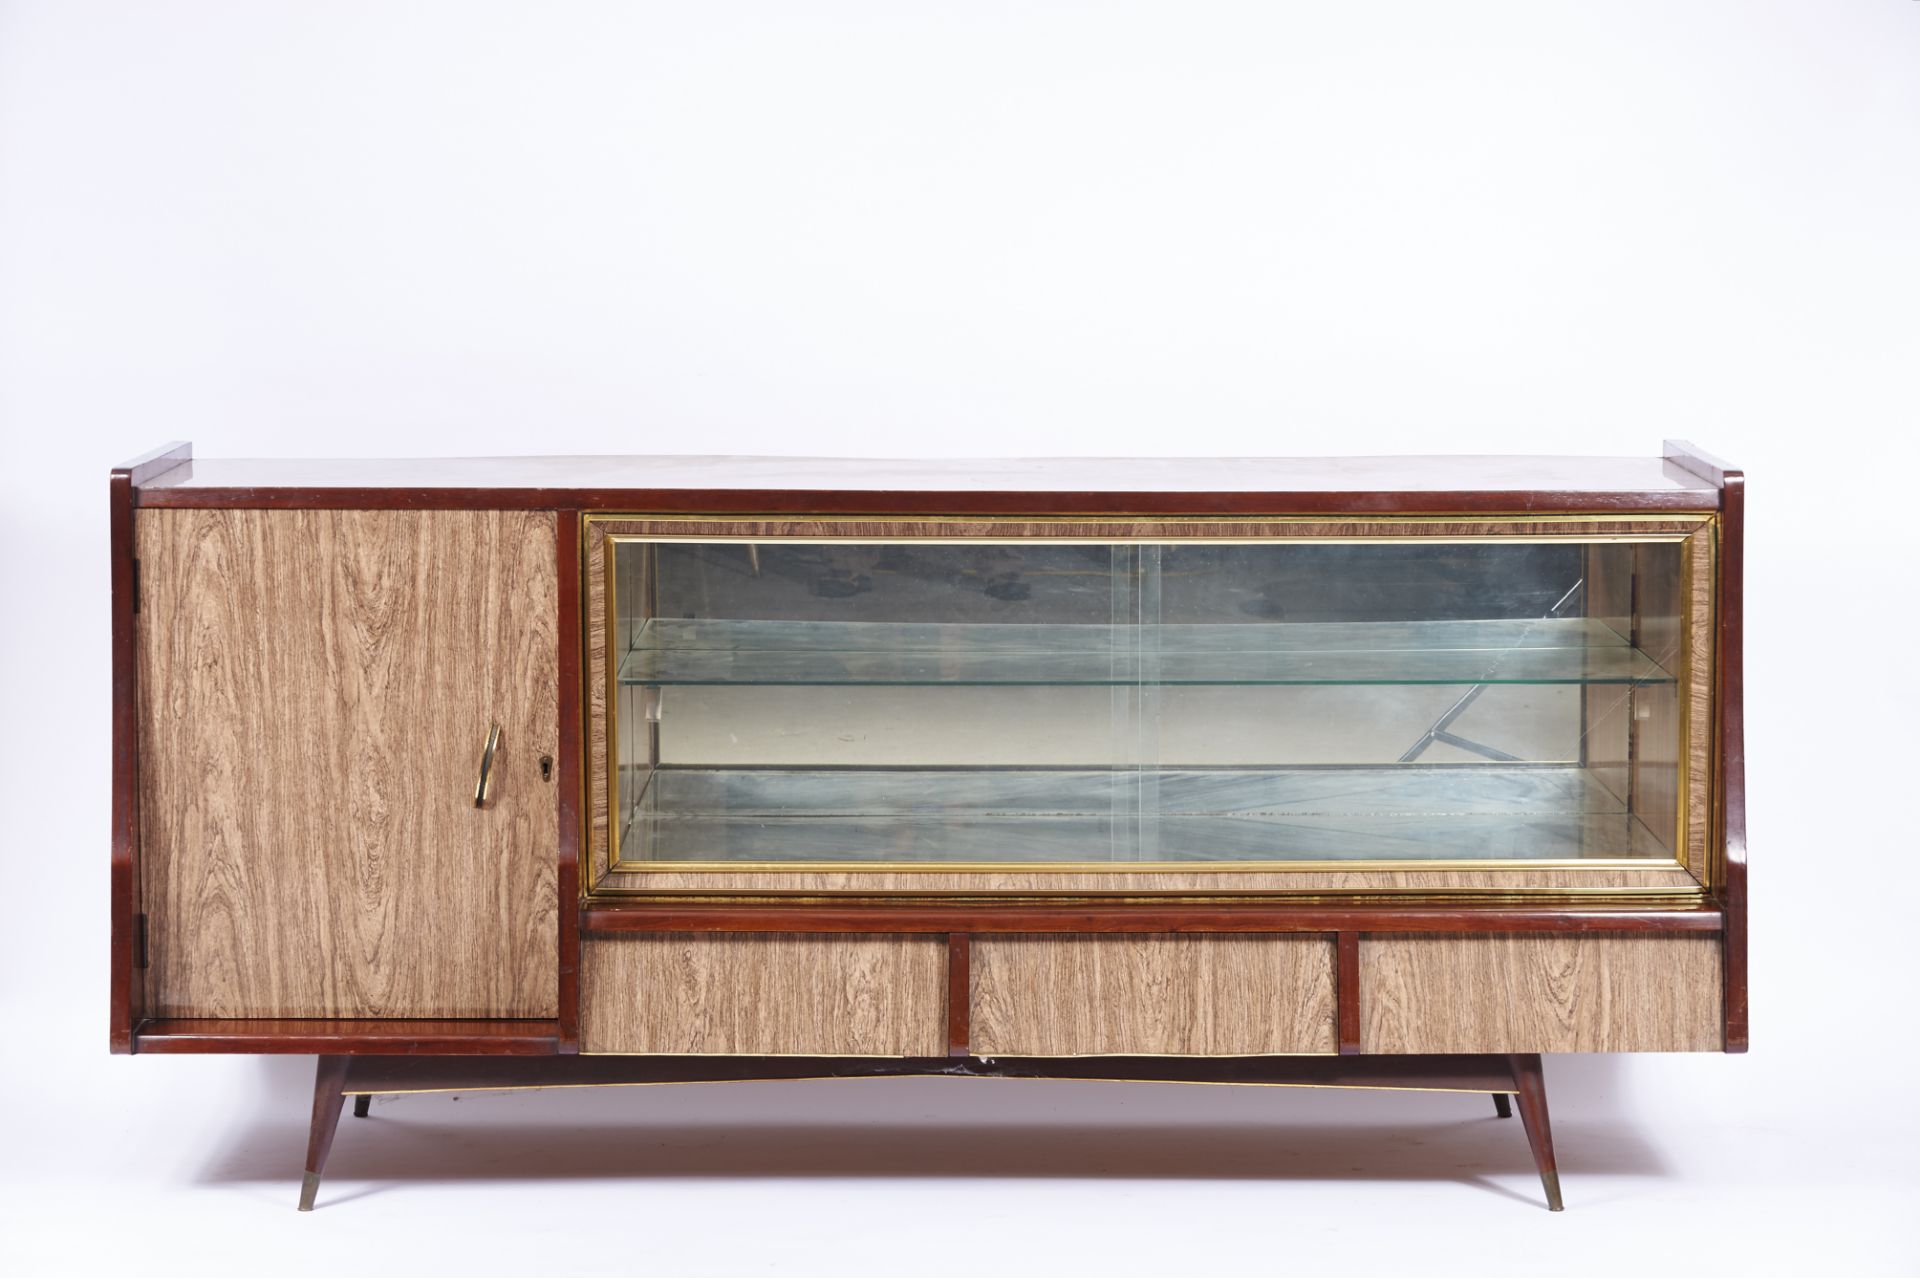 A Sideboard exotic wood formica top front and sides two glass sliding doors and shelves mirror